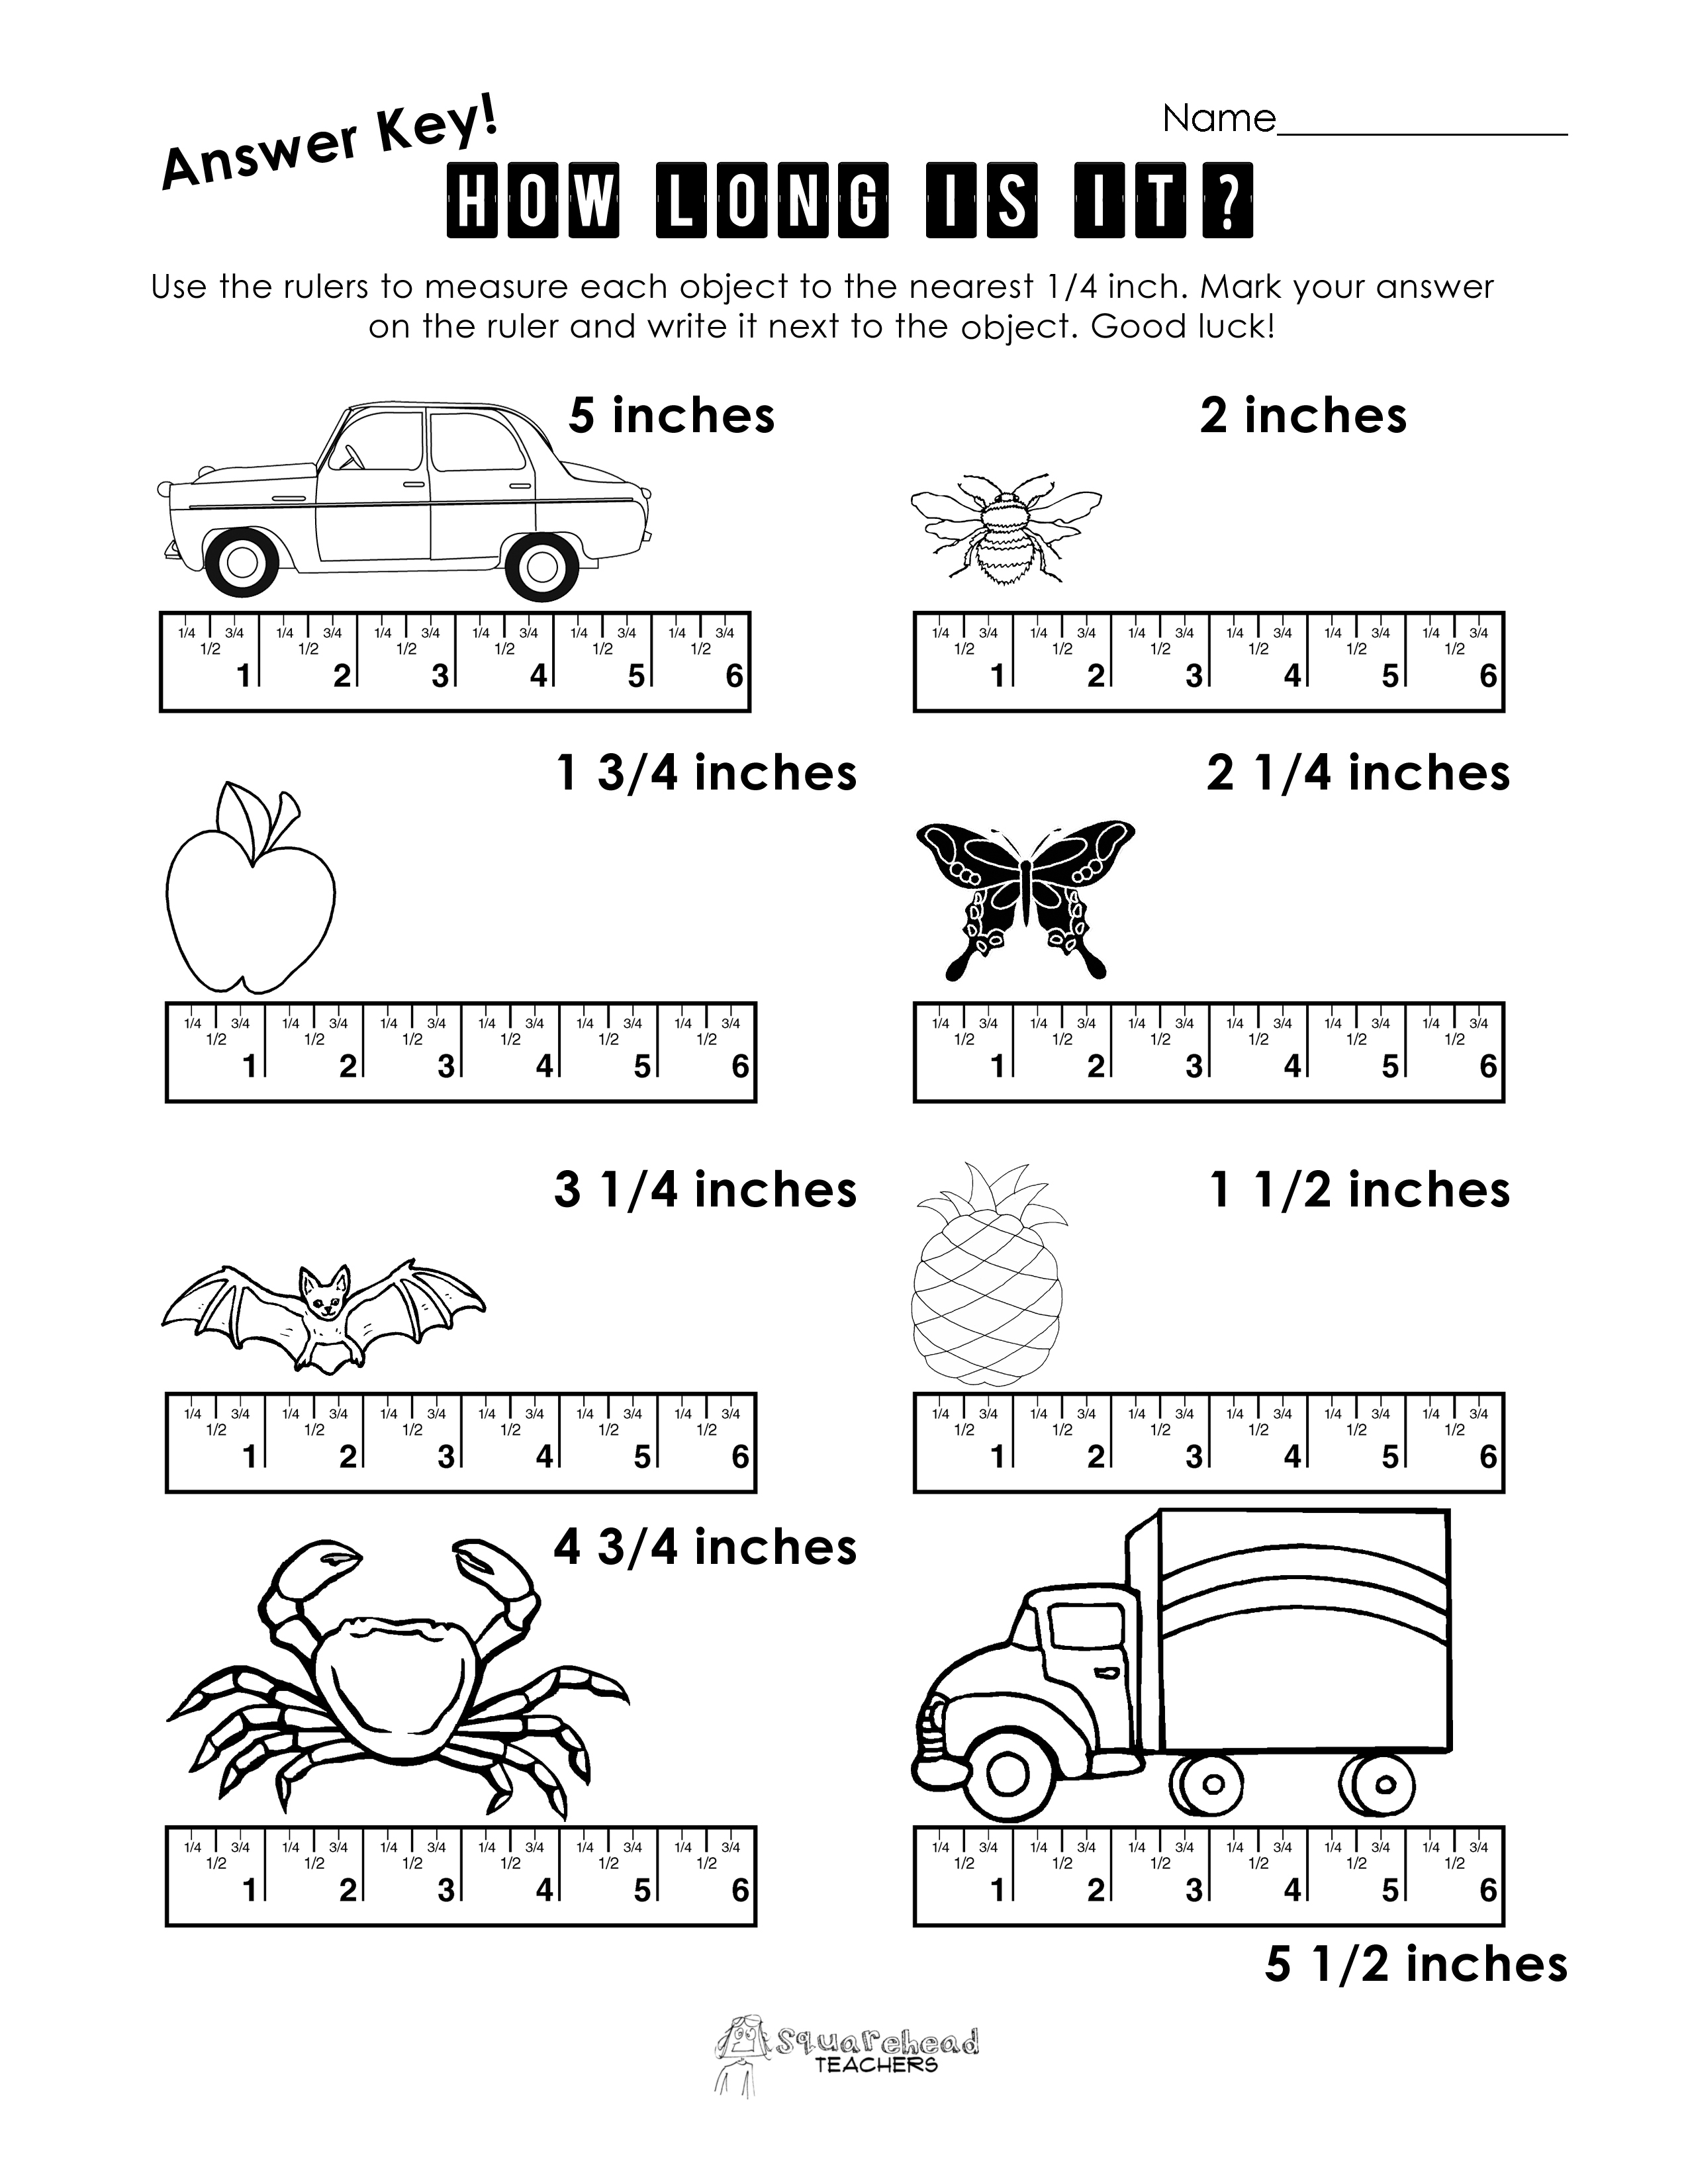 Printable Ruler for Kids to Color, Cut & Measure